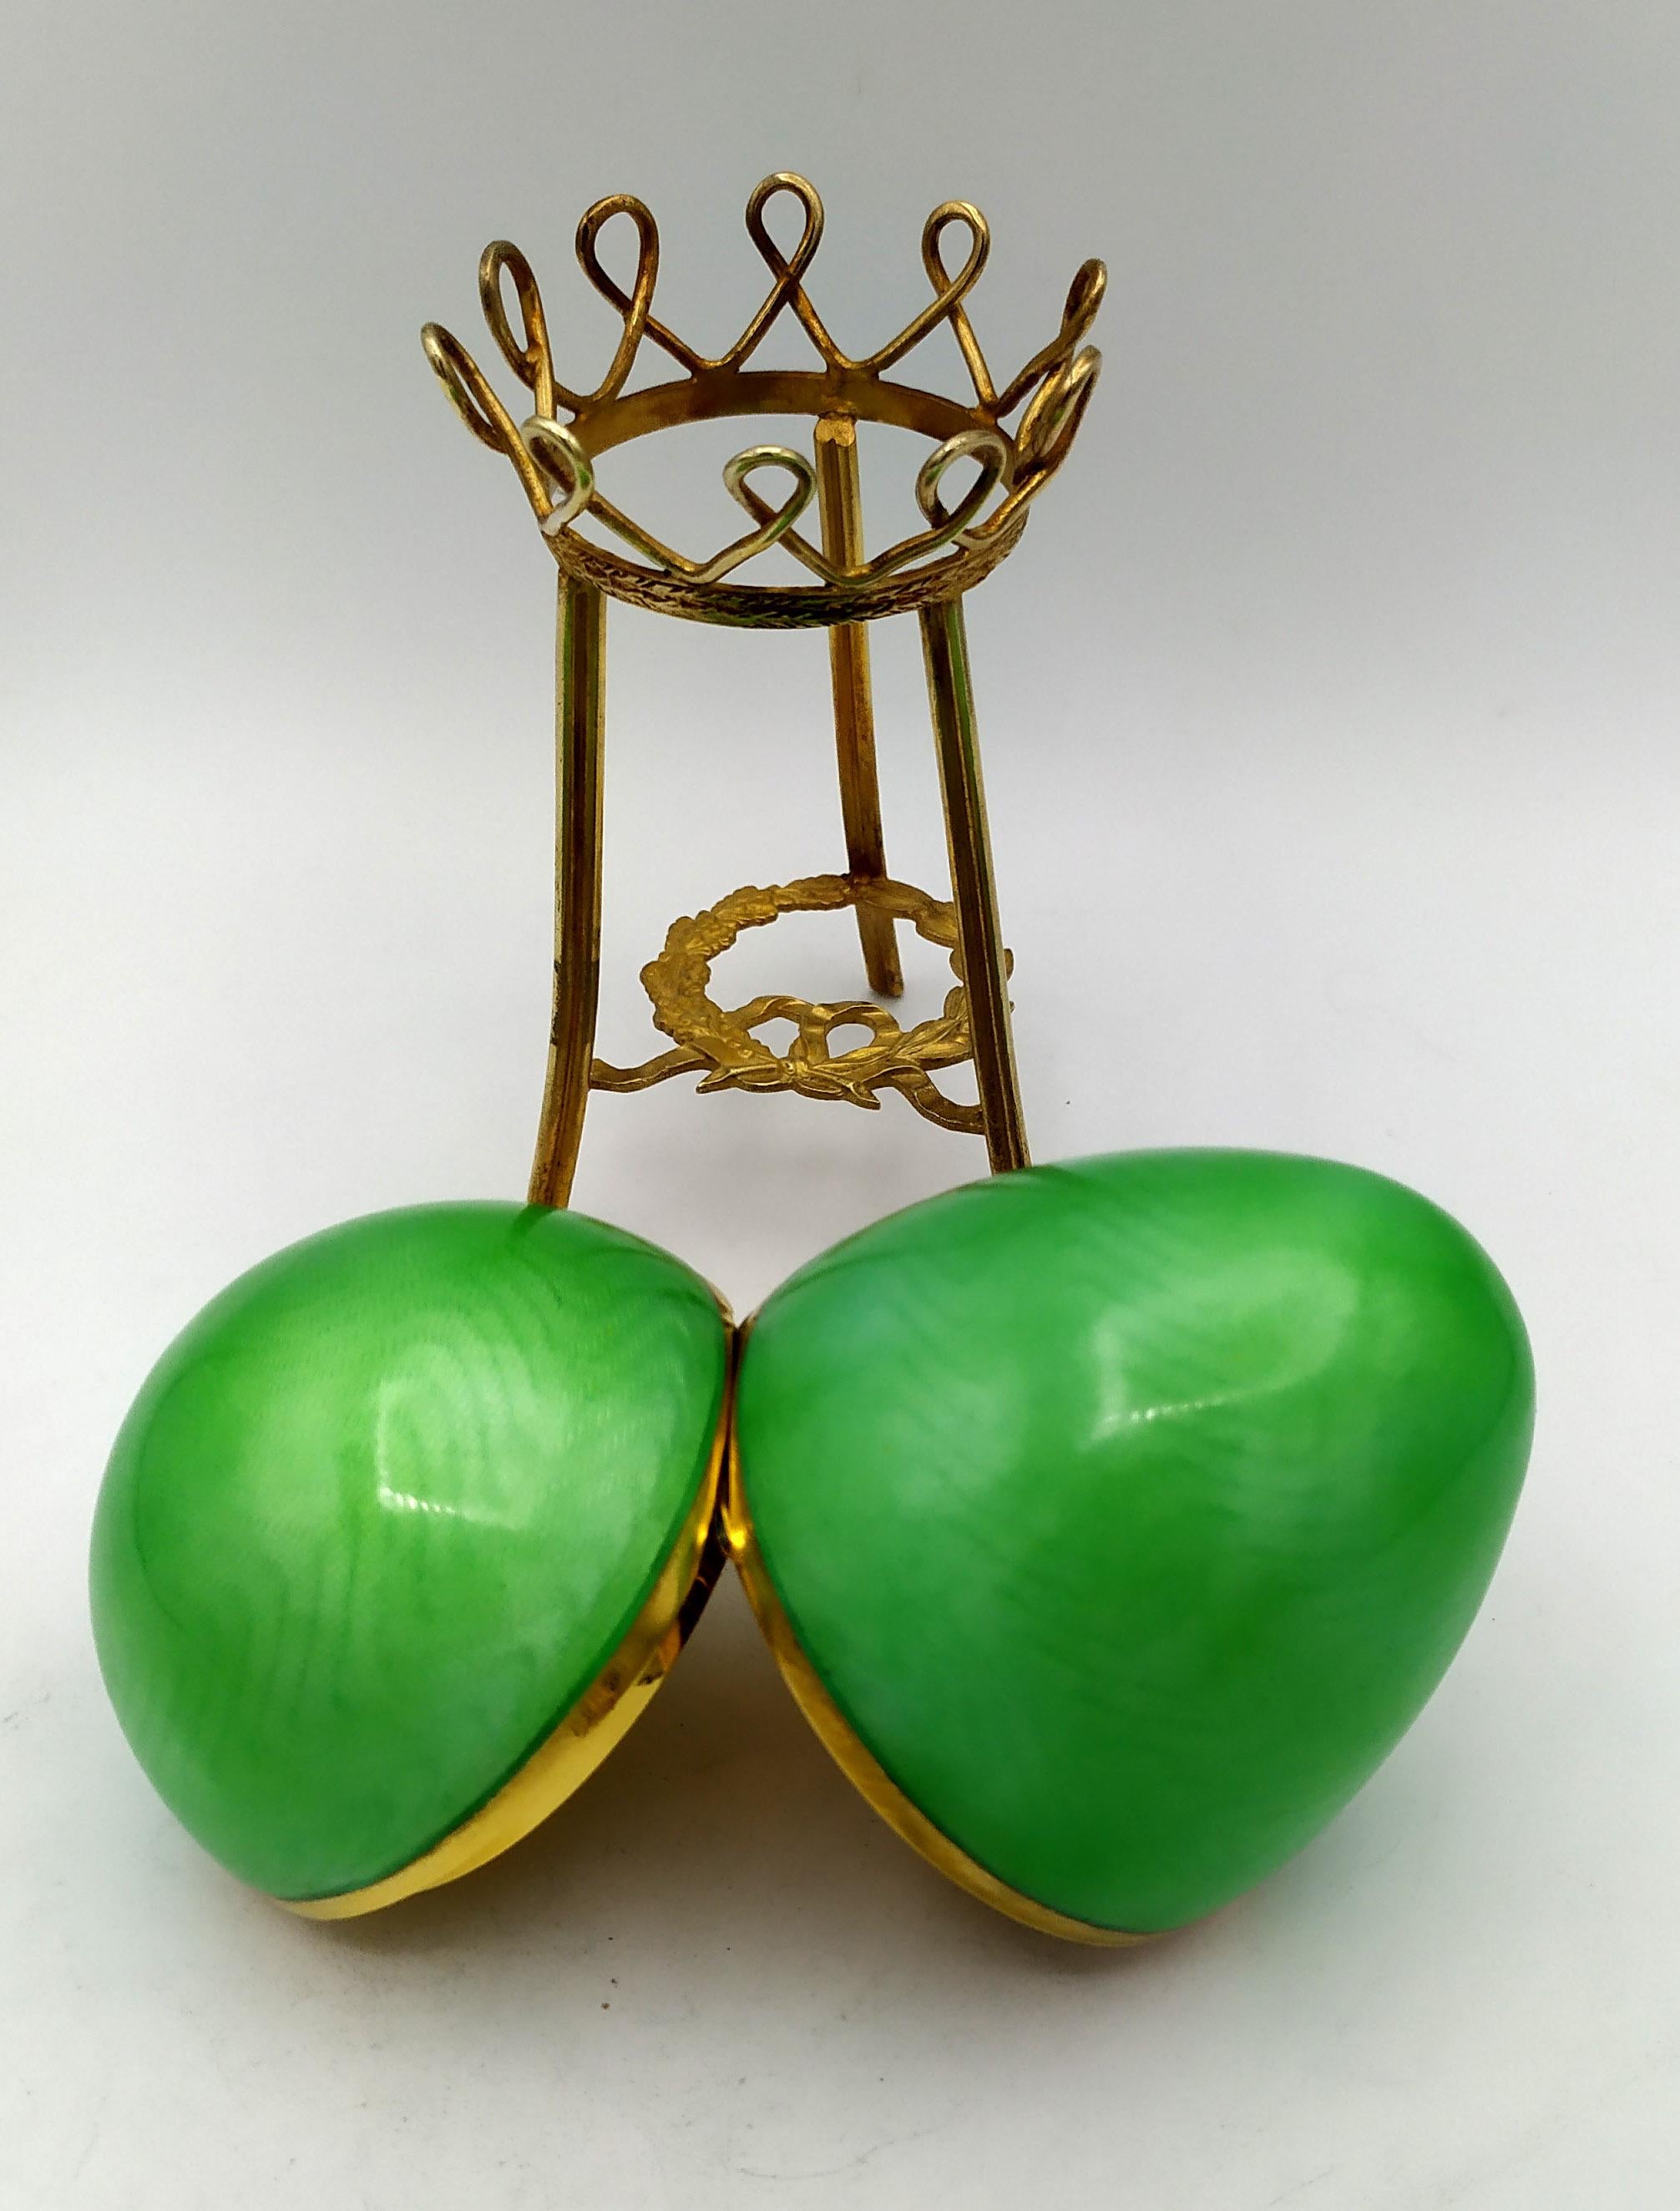 Plated Egg Russian Empire style enamel with tall tripod Sterling Silver Salimbeni 